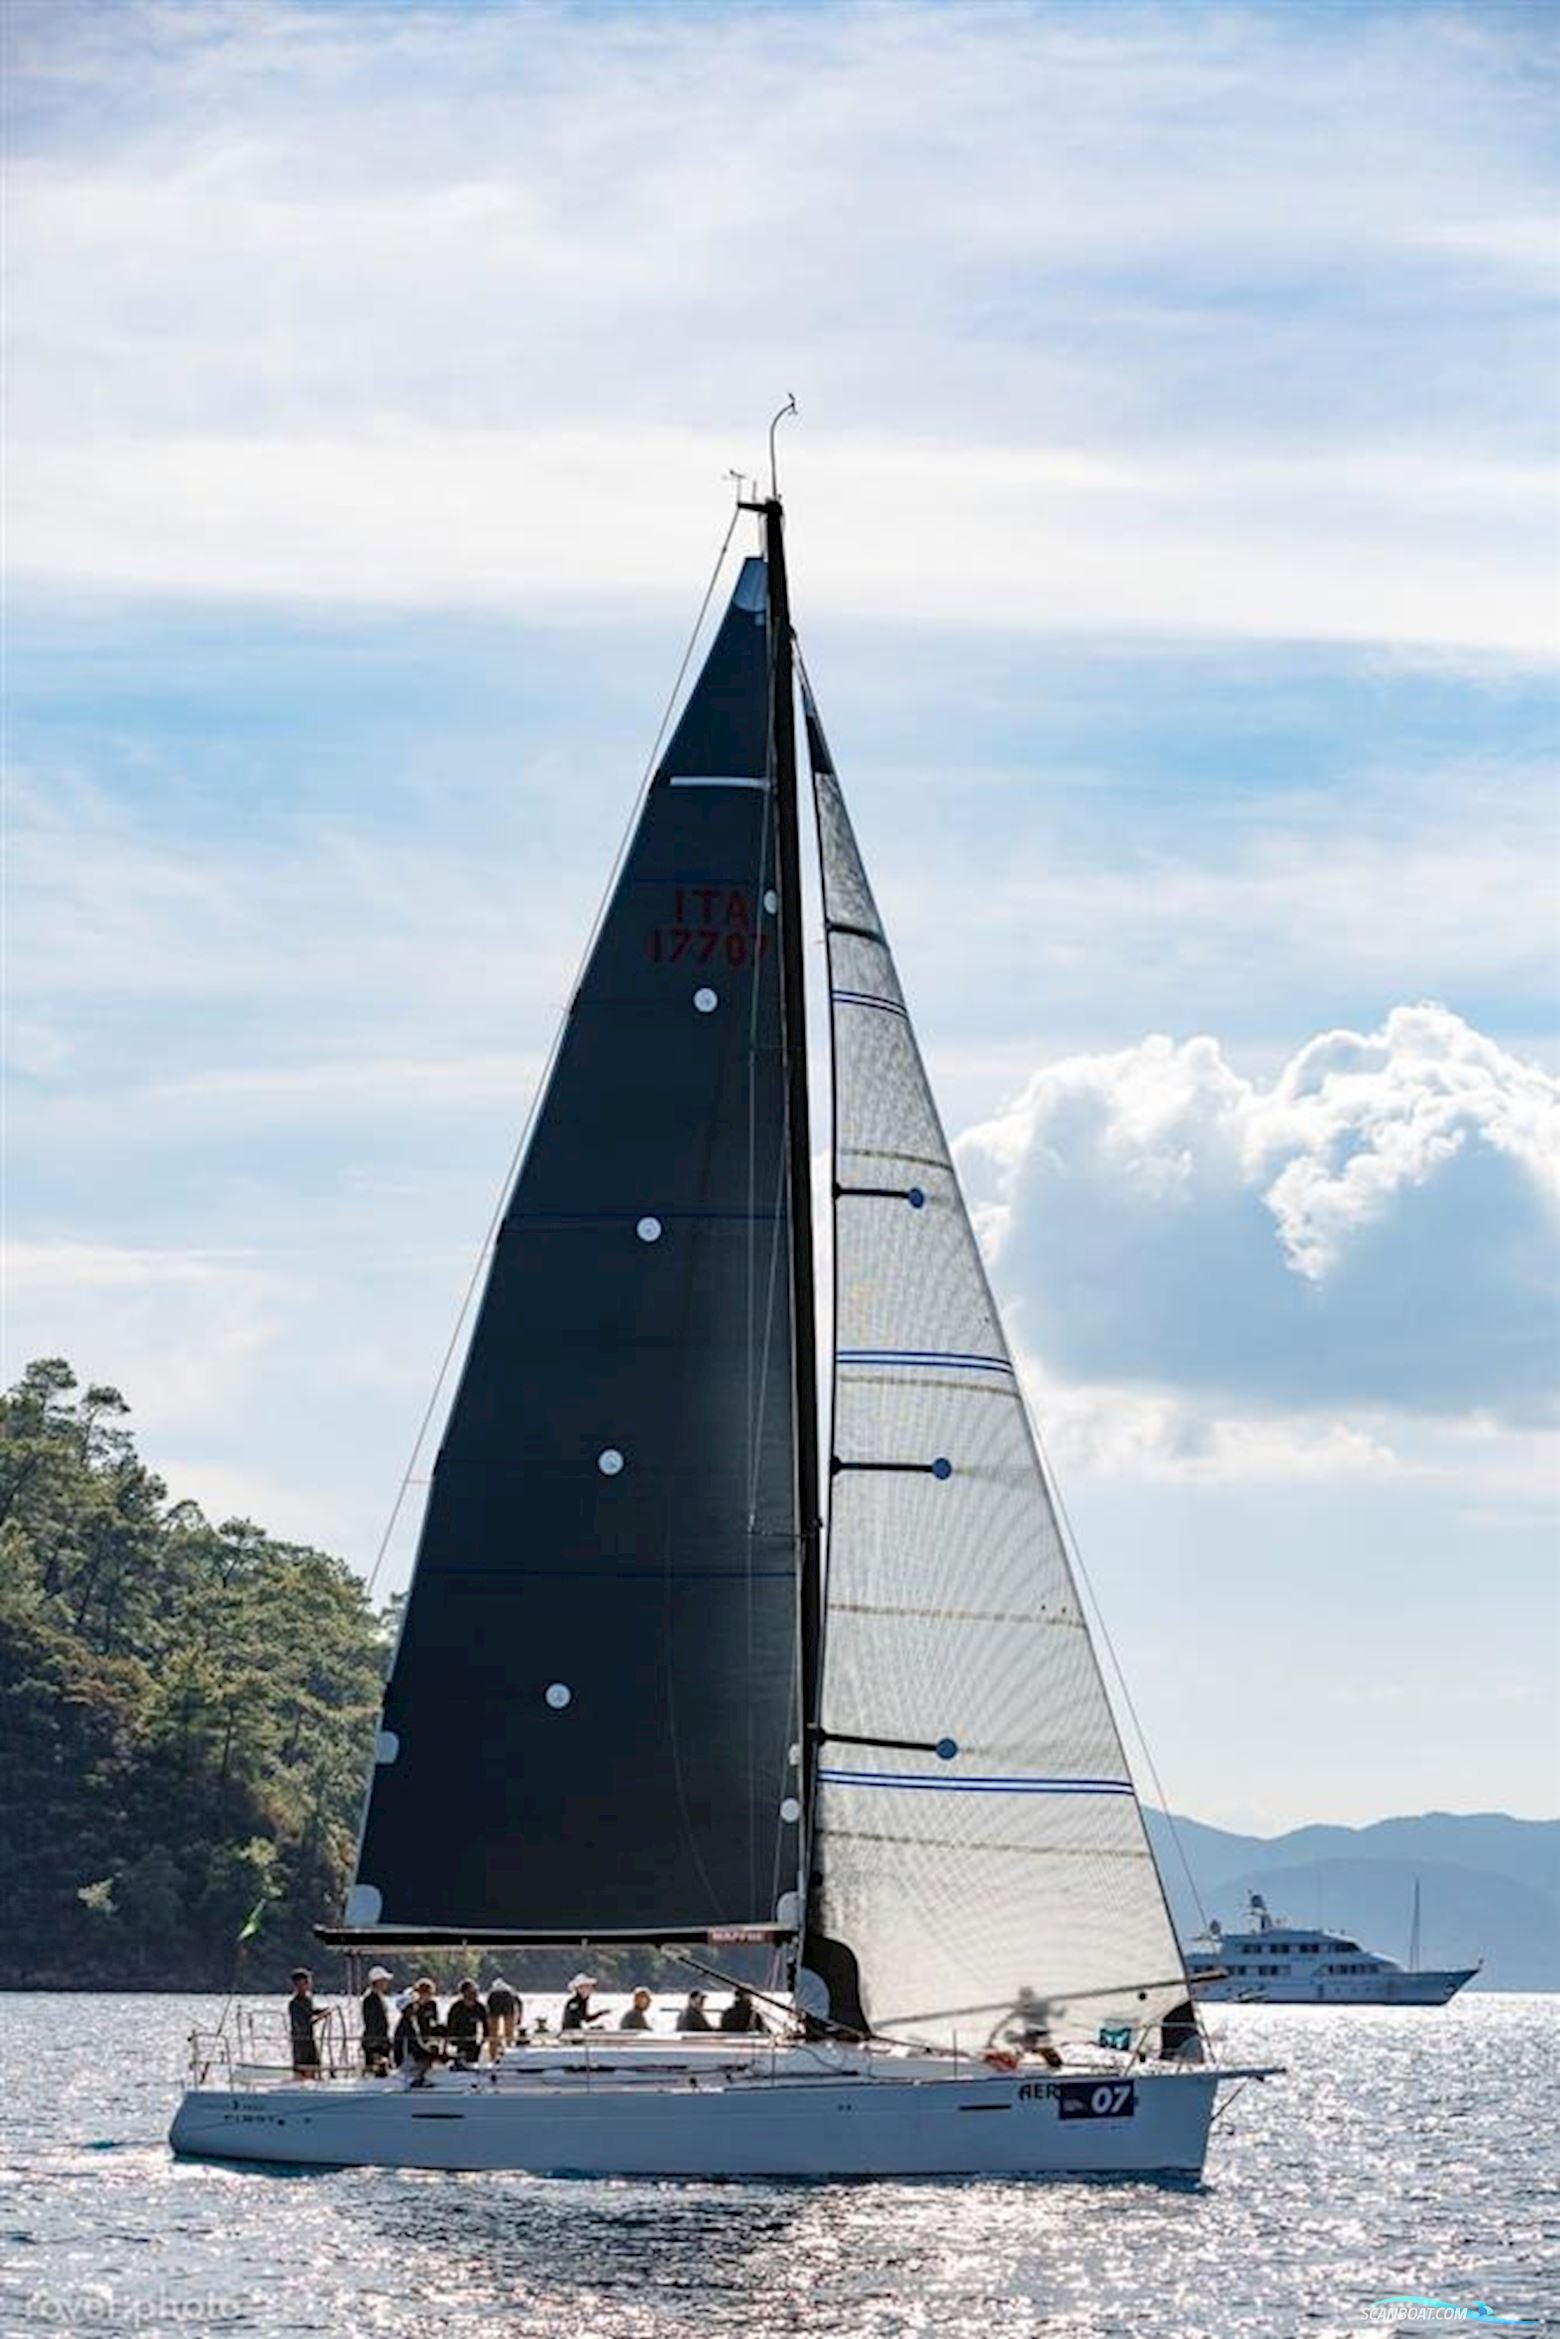 Beneteau First 40 Sailing boat 2011, with 1 x Yanmar 3JH5E engine, Turkey